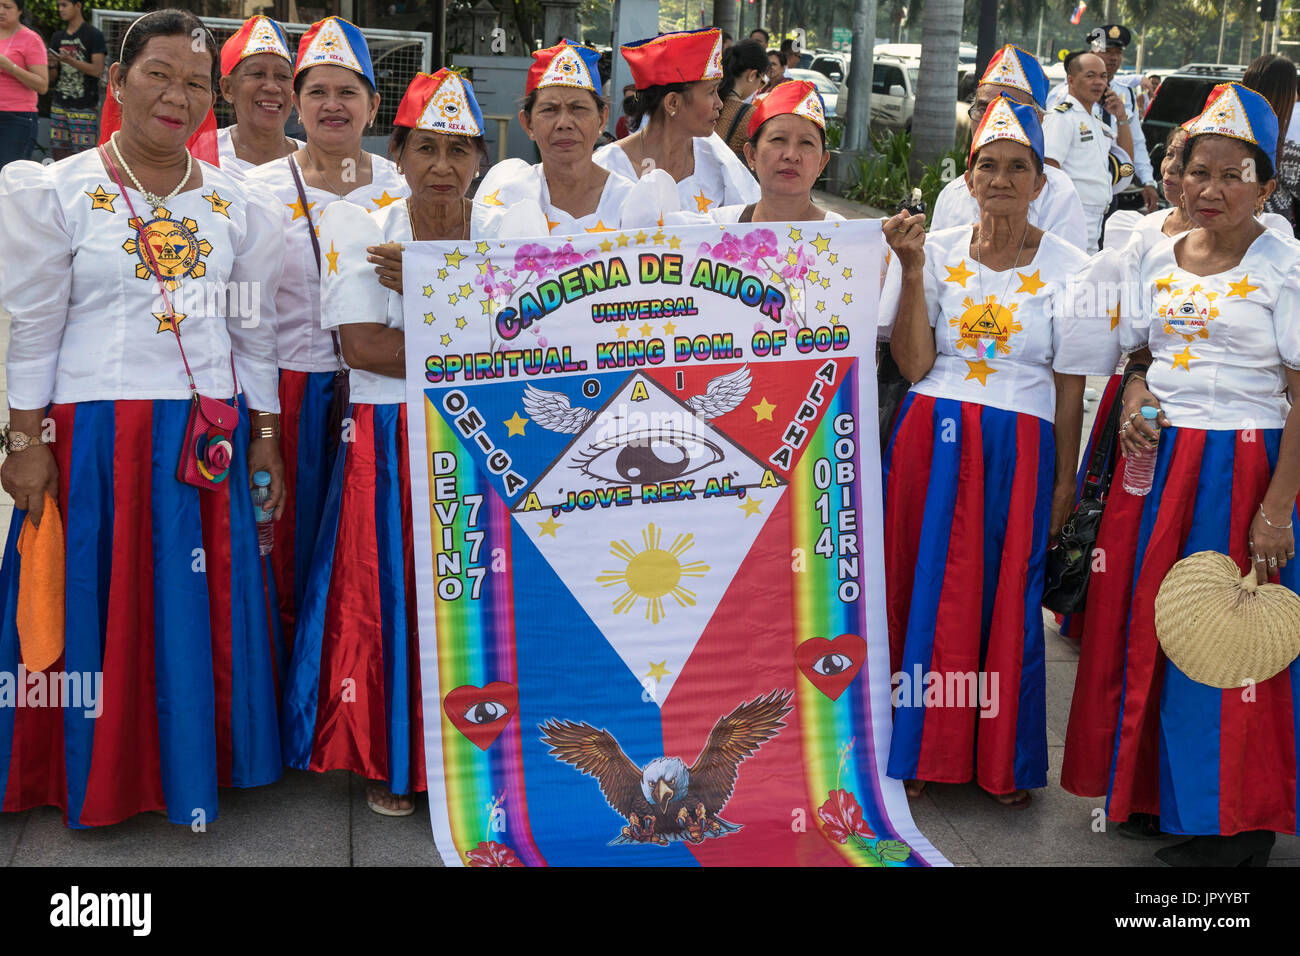 Religious group at anniversary of the death of Dr. Jose Rizal, Manila, Philippines Stock Photo